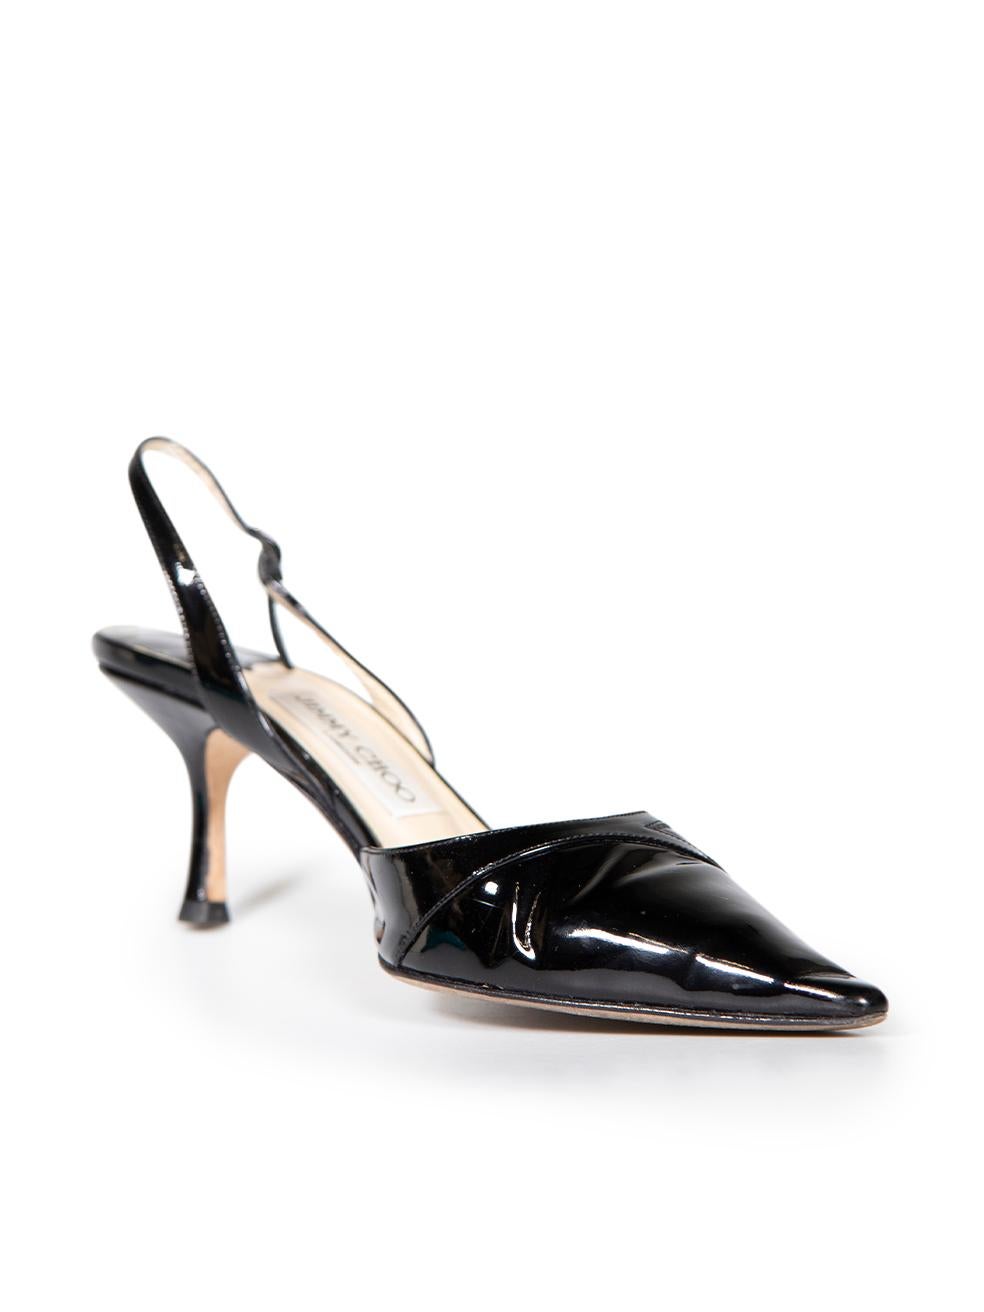 CONDITION is Good. Minor wear to shoes is evident. Light wear to overall leather with creasing on this used Jimmy Choo designer resale item.
 
 Details
 Black
 Patent leather
 Heeled sandals
 Point toe
 Front button detail
 Adjustable slingback